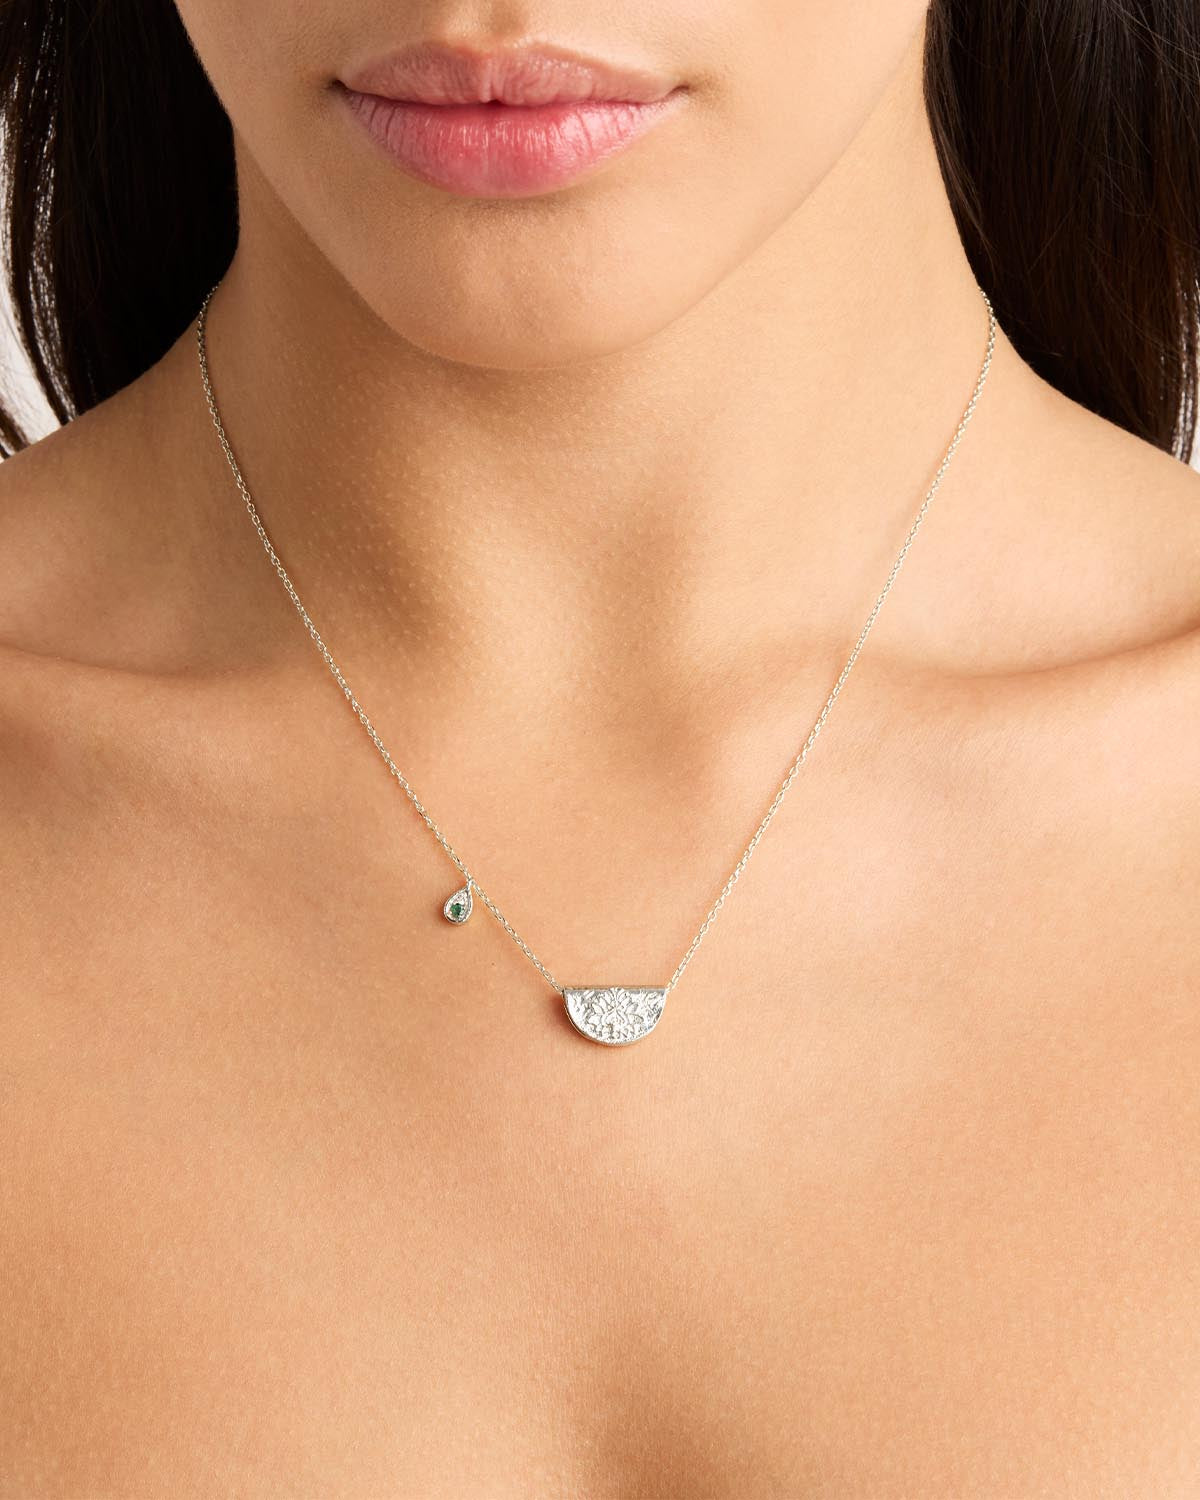 Tiny October Birthstone Necklace / Genuine Faceted Welo Opal / Sterling  Silver / 14k Yellow Gold Filled / 14k Rose Gold Filled